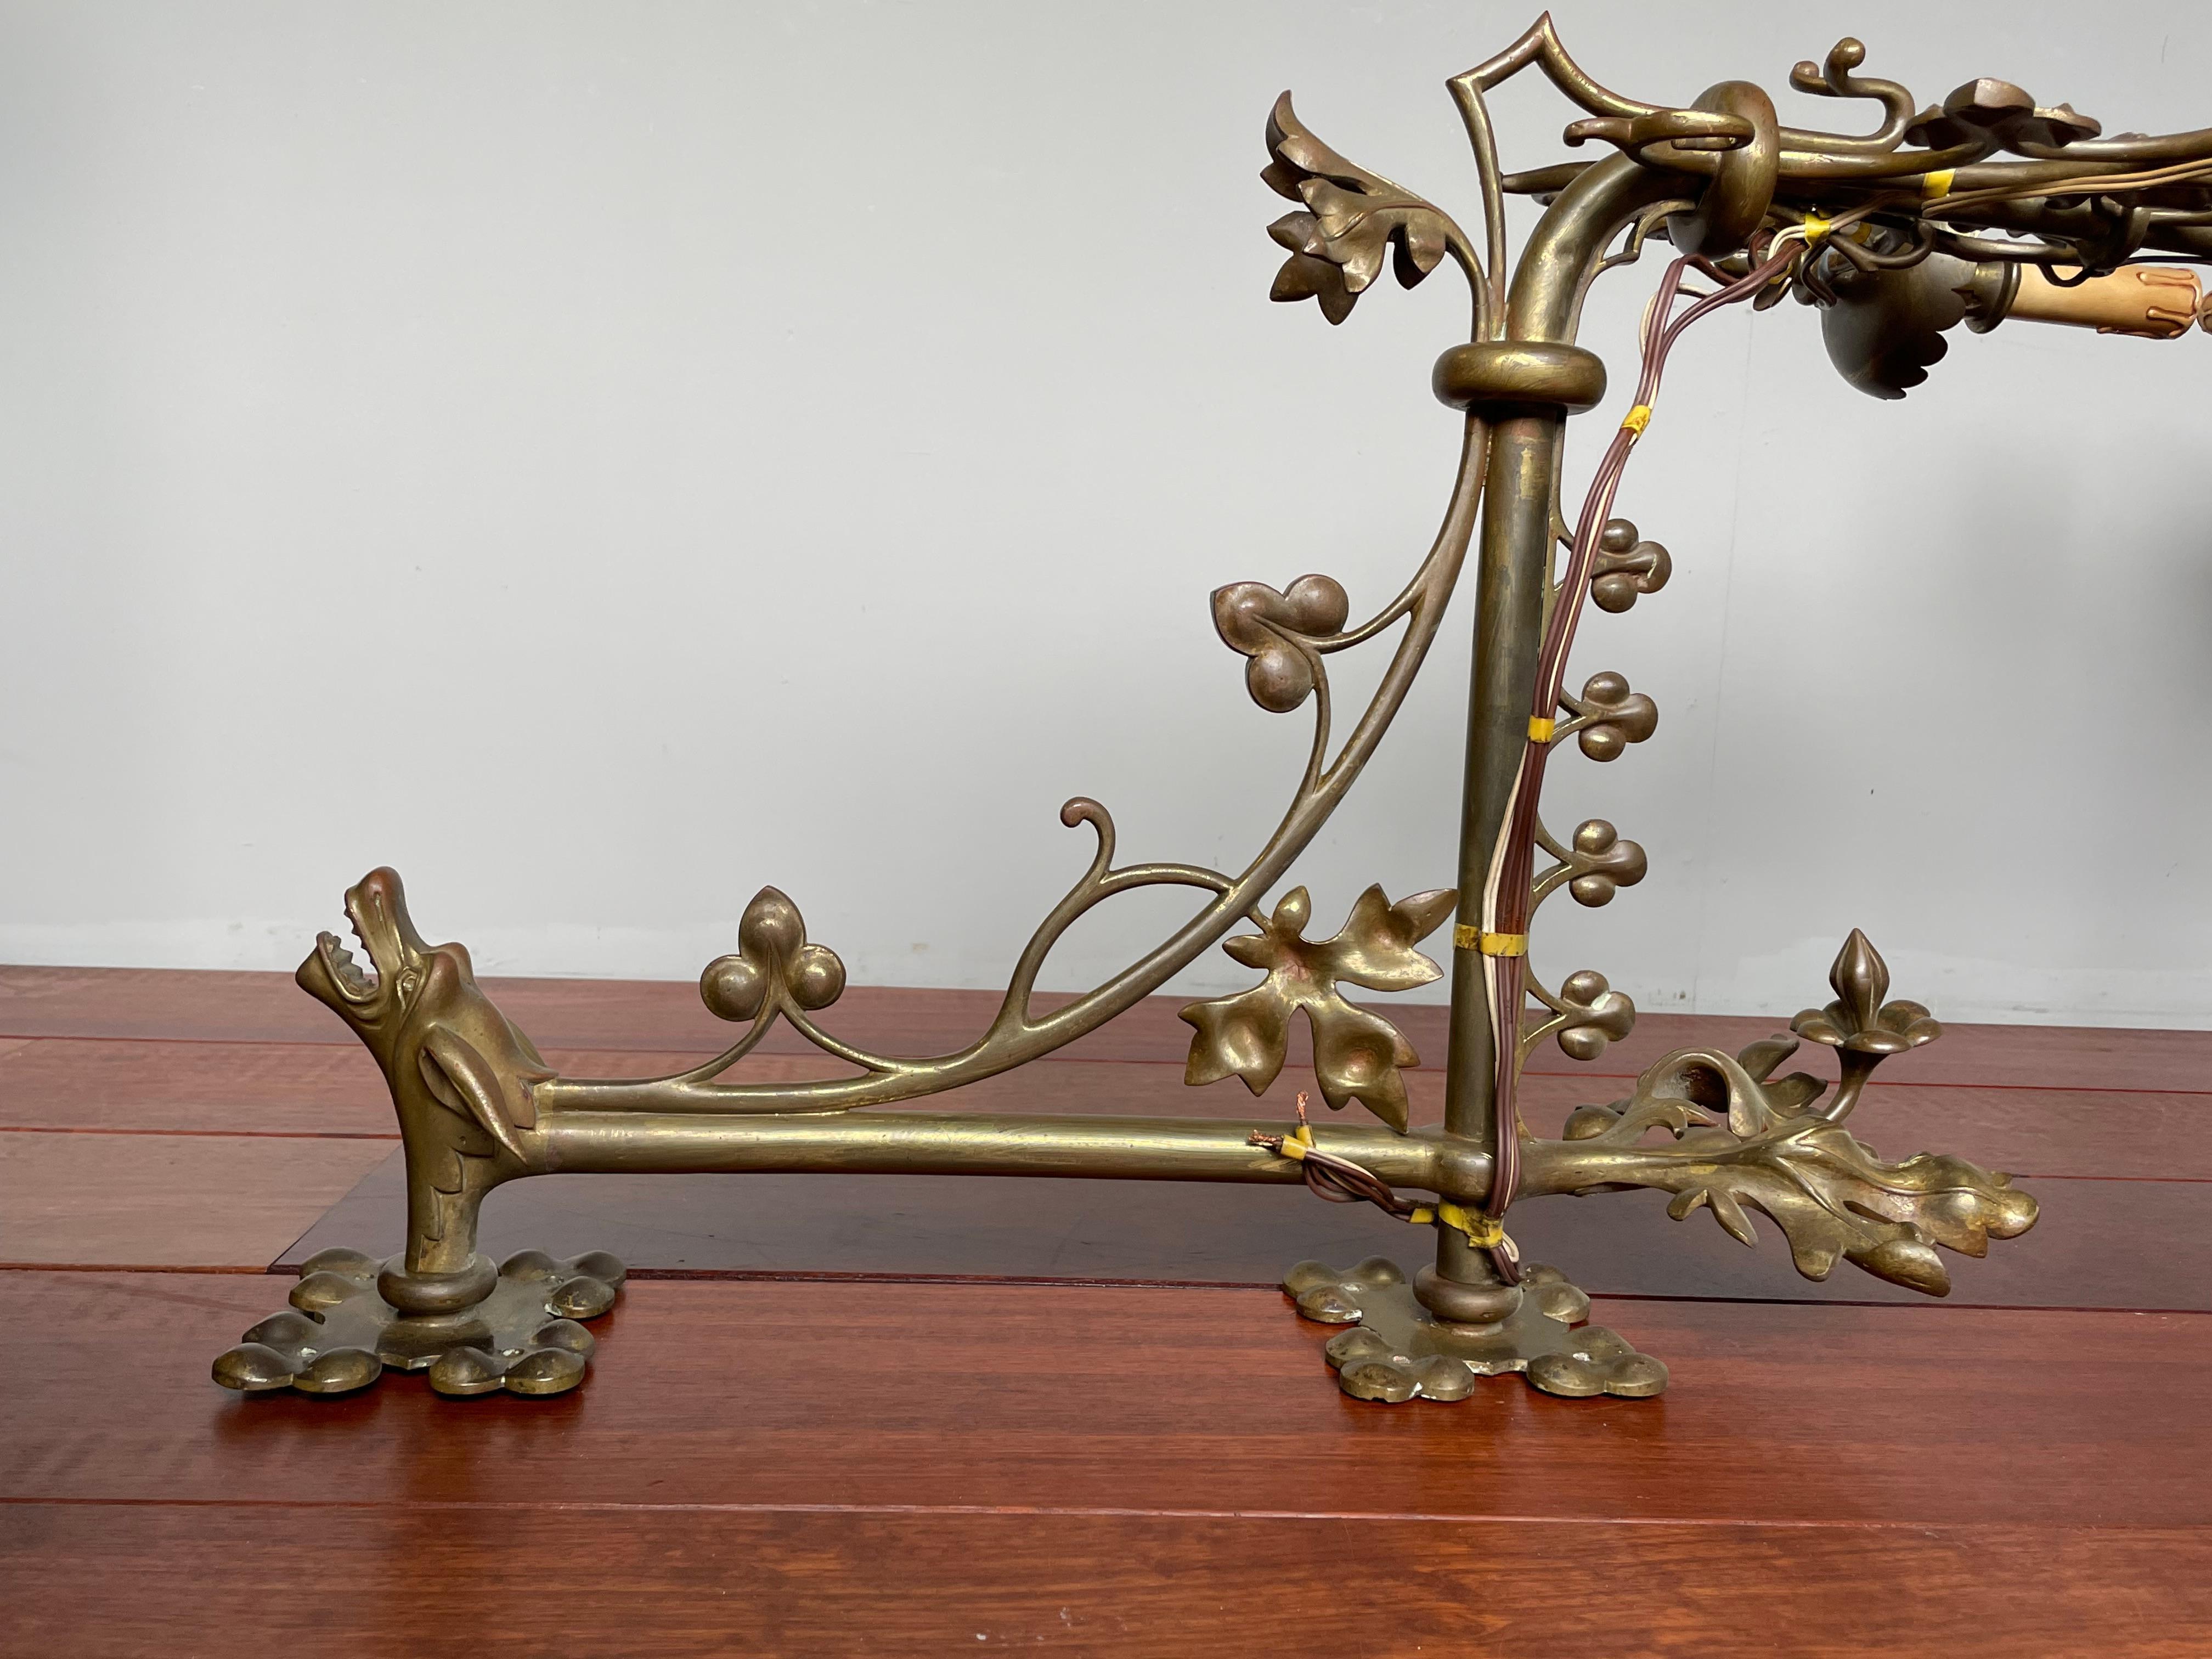 Cast Large Gothic Revival Bronze Candelabra Wall Sconces / Candle Sconce w. Gargoyles For Sale